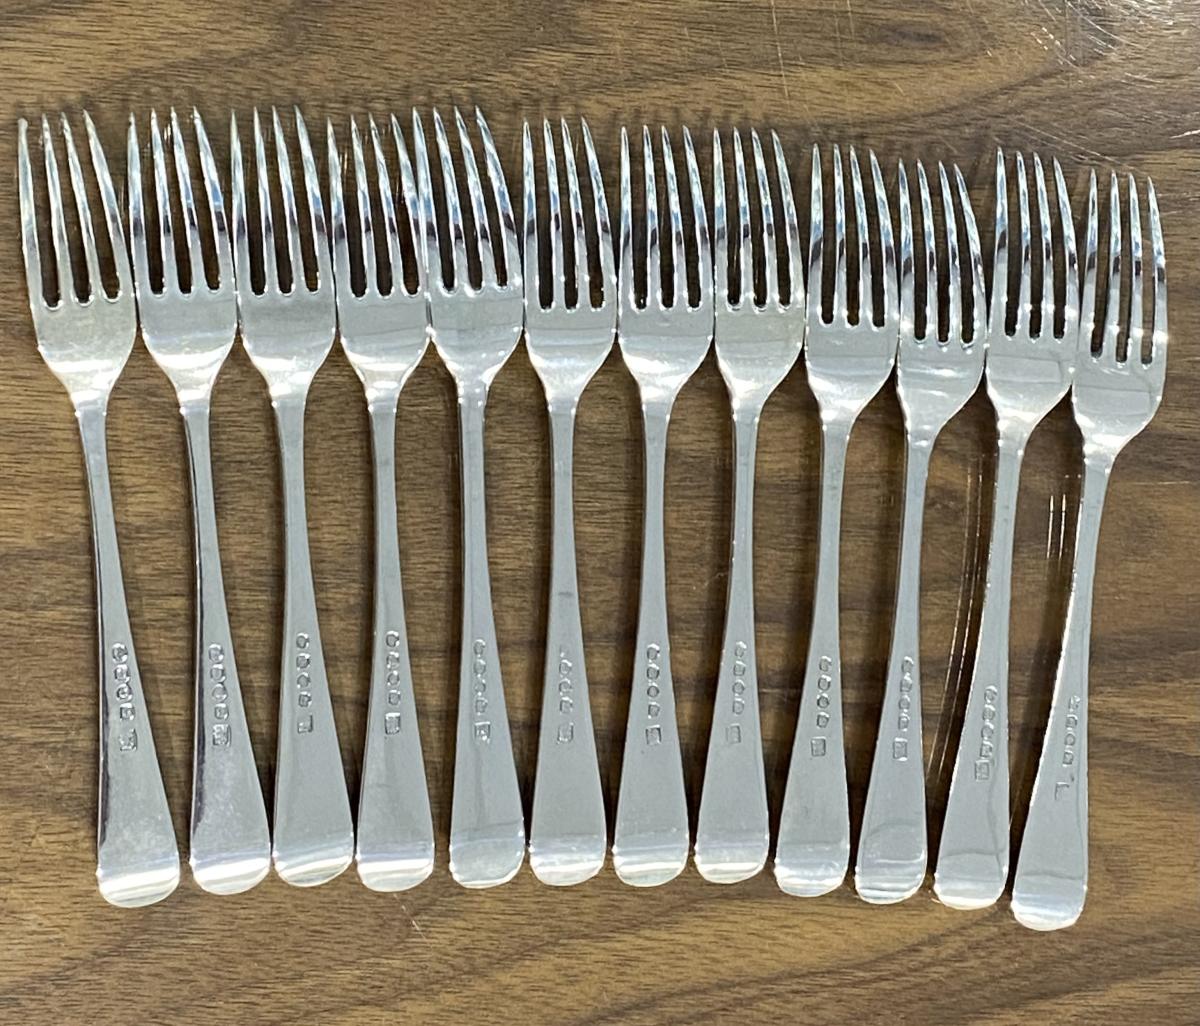 Georgian silver old English pattern dessert forks Eley ,Fearn and Chawner 1814